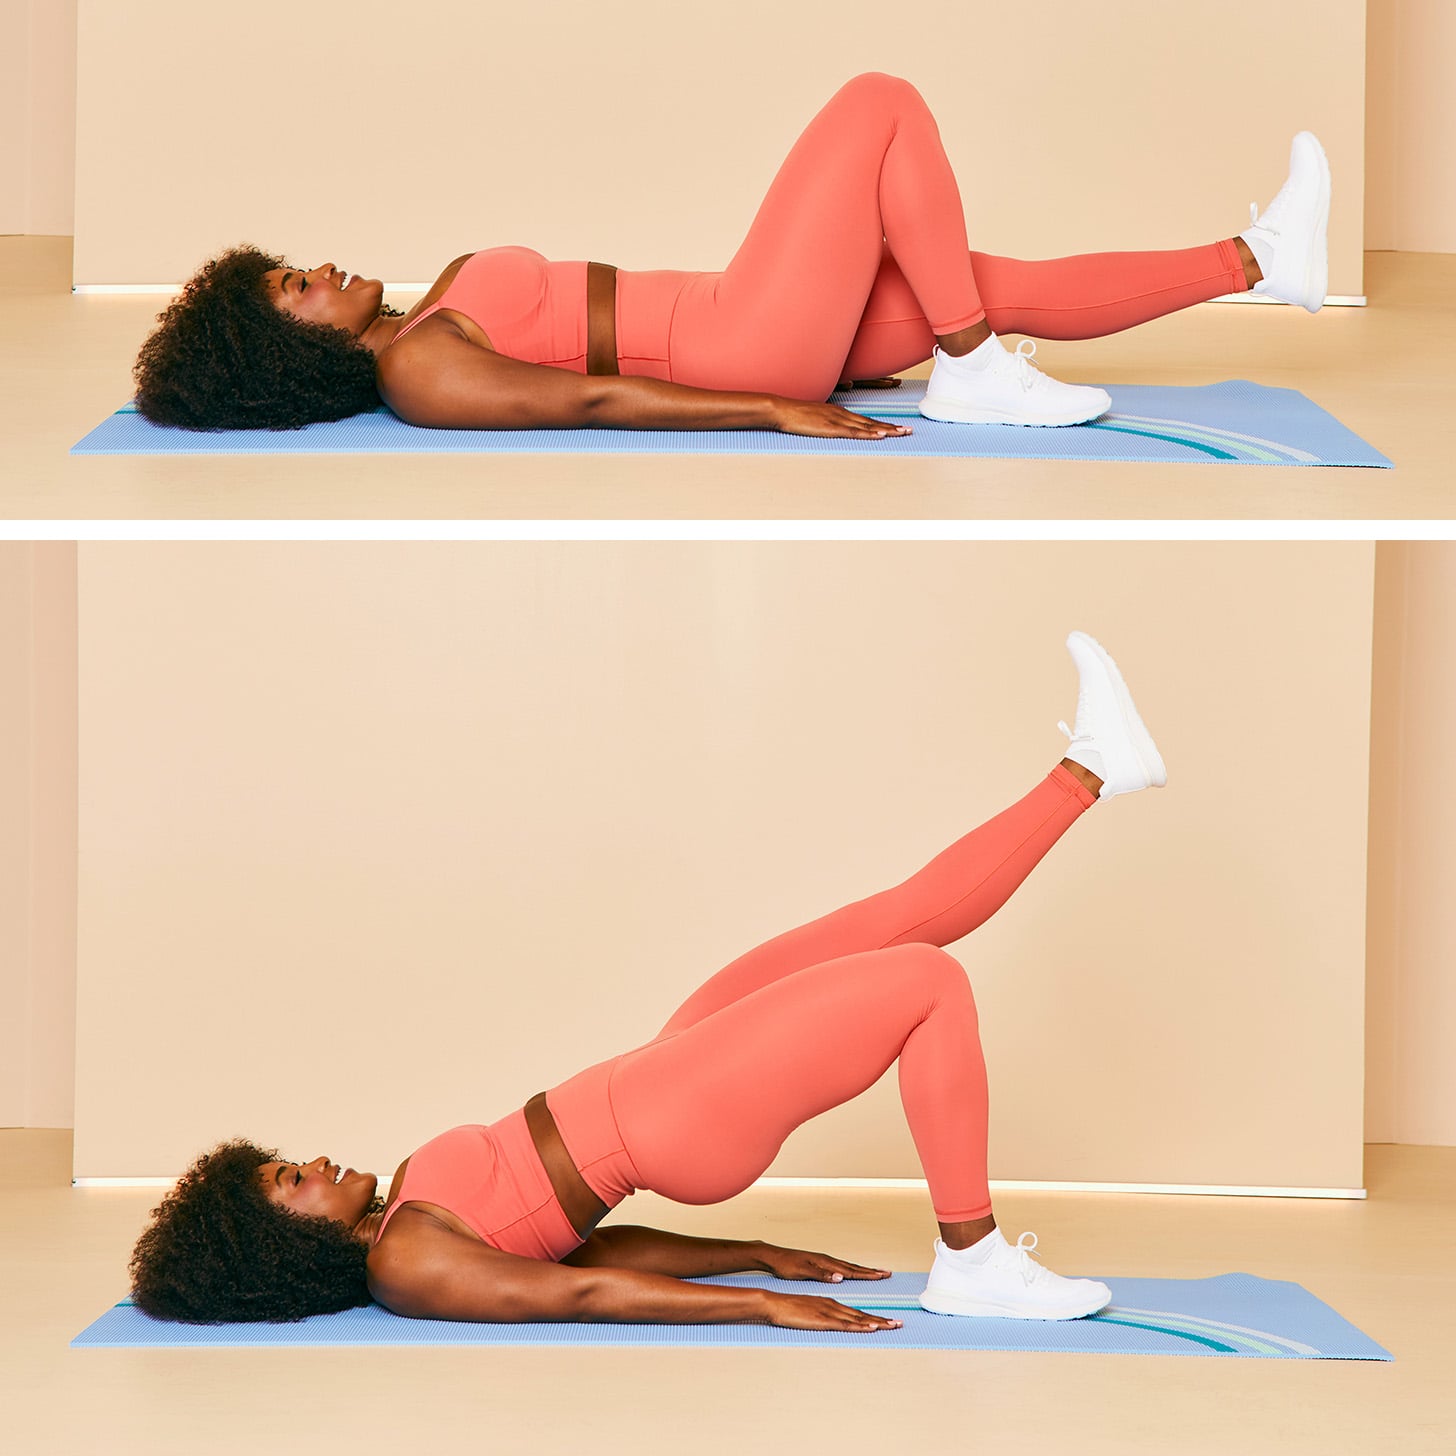 7 EXERCISES THAT CHANGED MY GLUTE TRAINING - TARGET BOOTY WITH